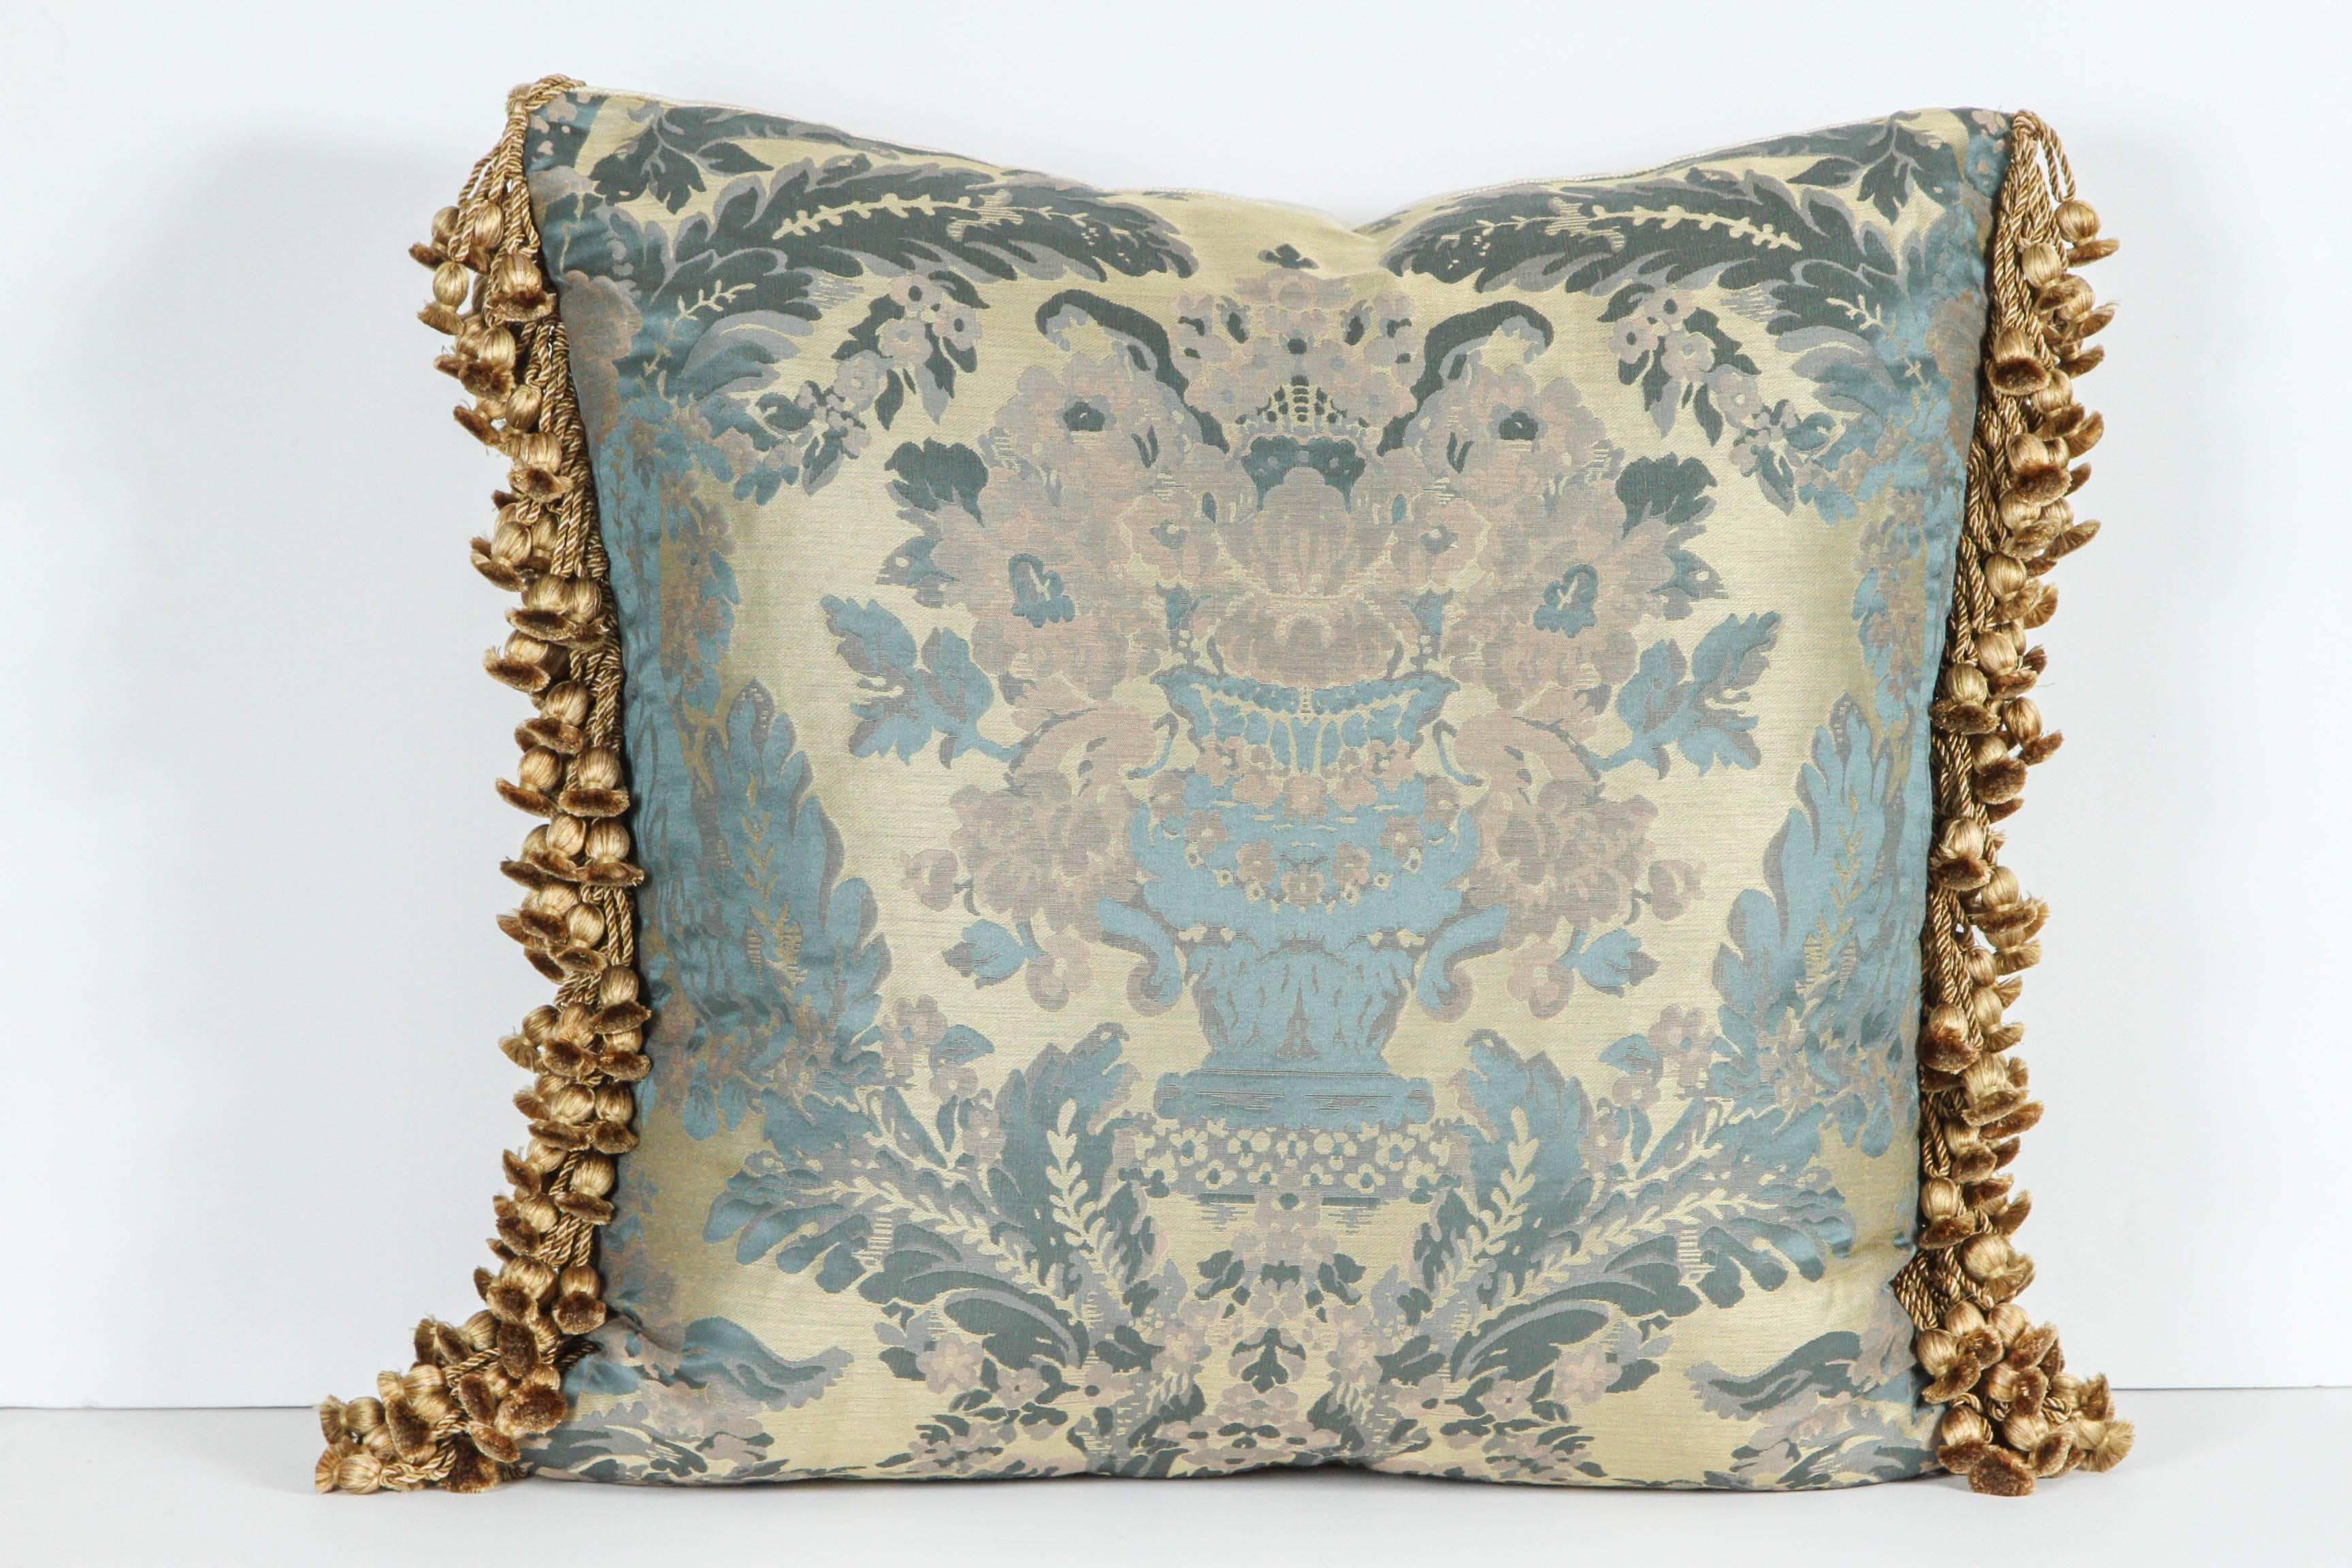 Pair of Luigi Bevilacqua brocade silk pillows with flower basket motif. The pillows have silk trim and silk velvet backing in soft blues, mauve and gold. Featuring Janet Yonaty silk velvet backing and tassels. The prices listed for for one pair but